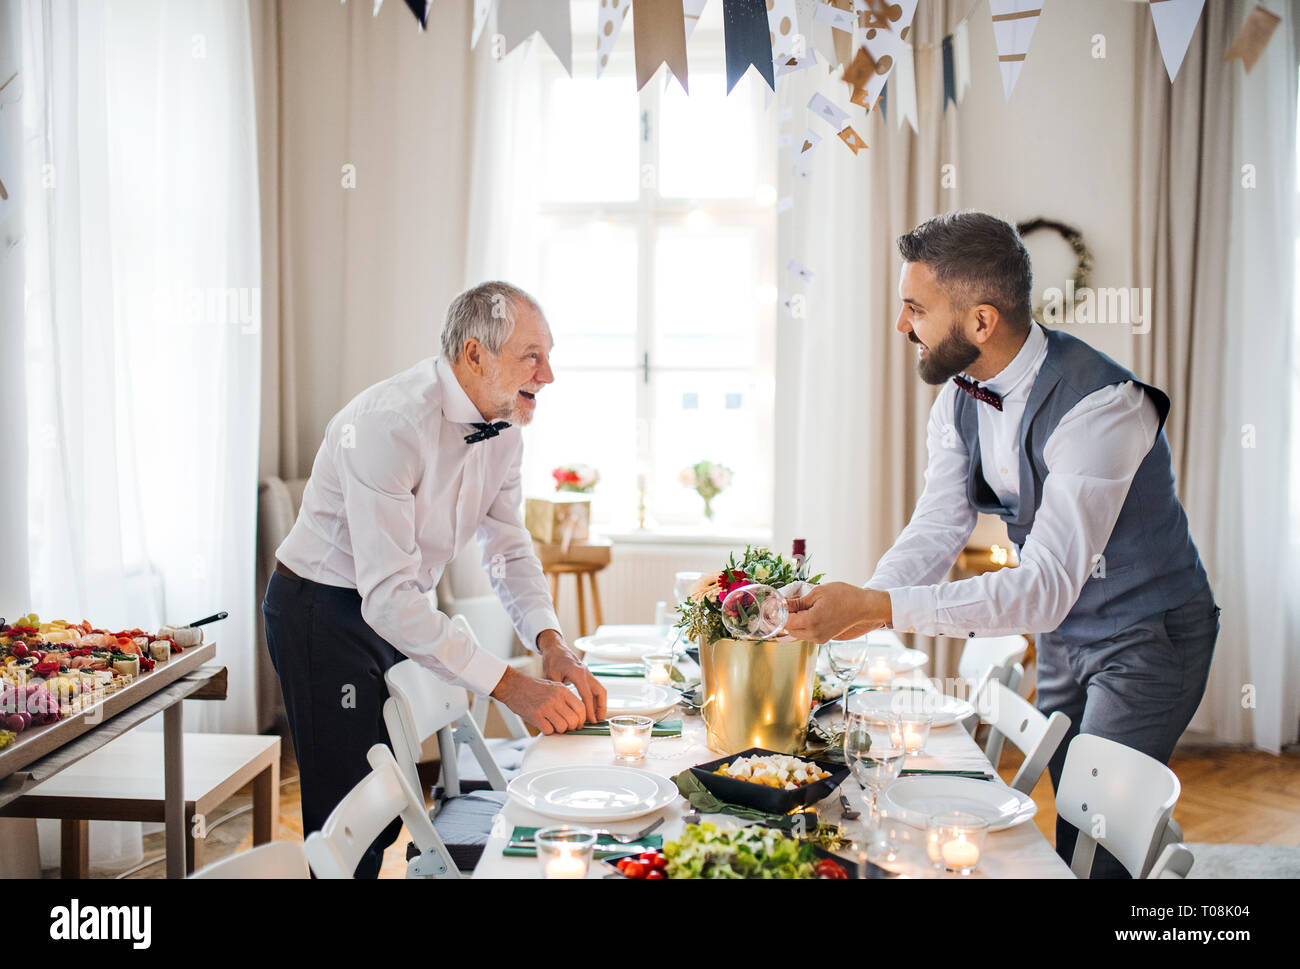 Two men with bows setting a table for an indoor party, talking. Stock Photo